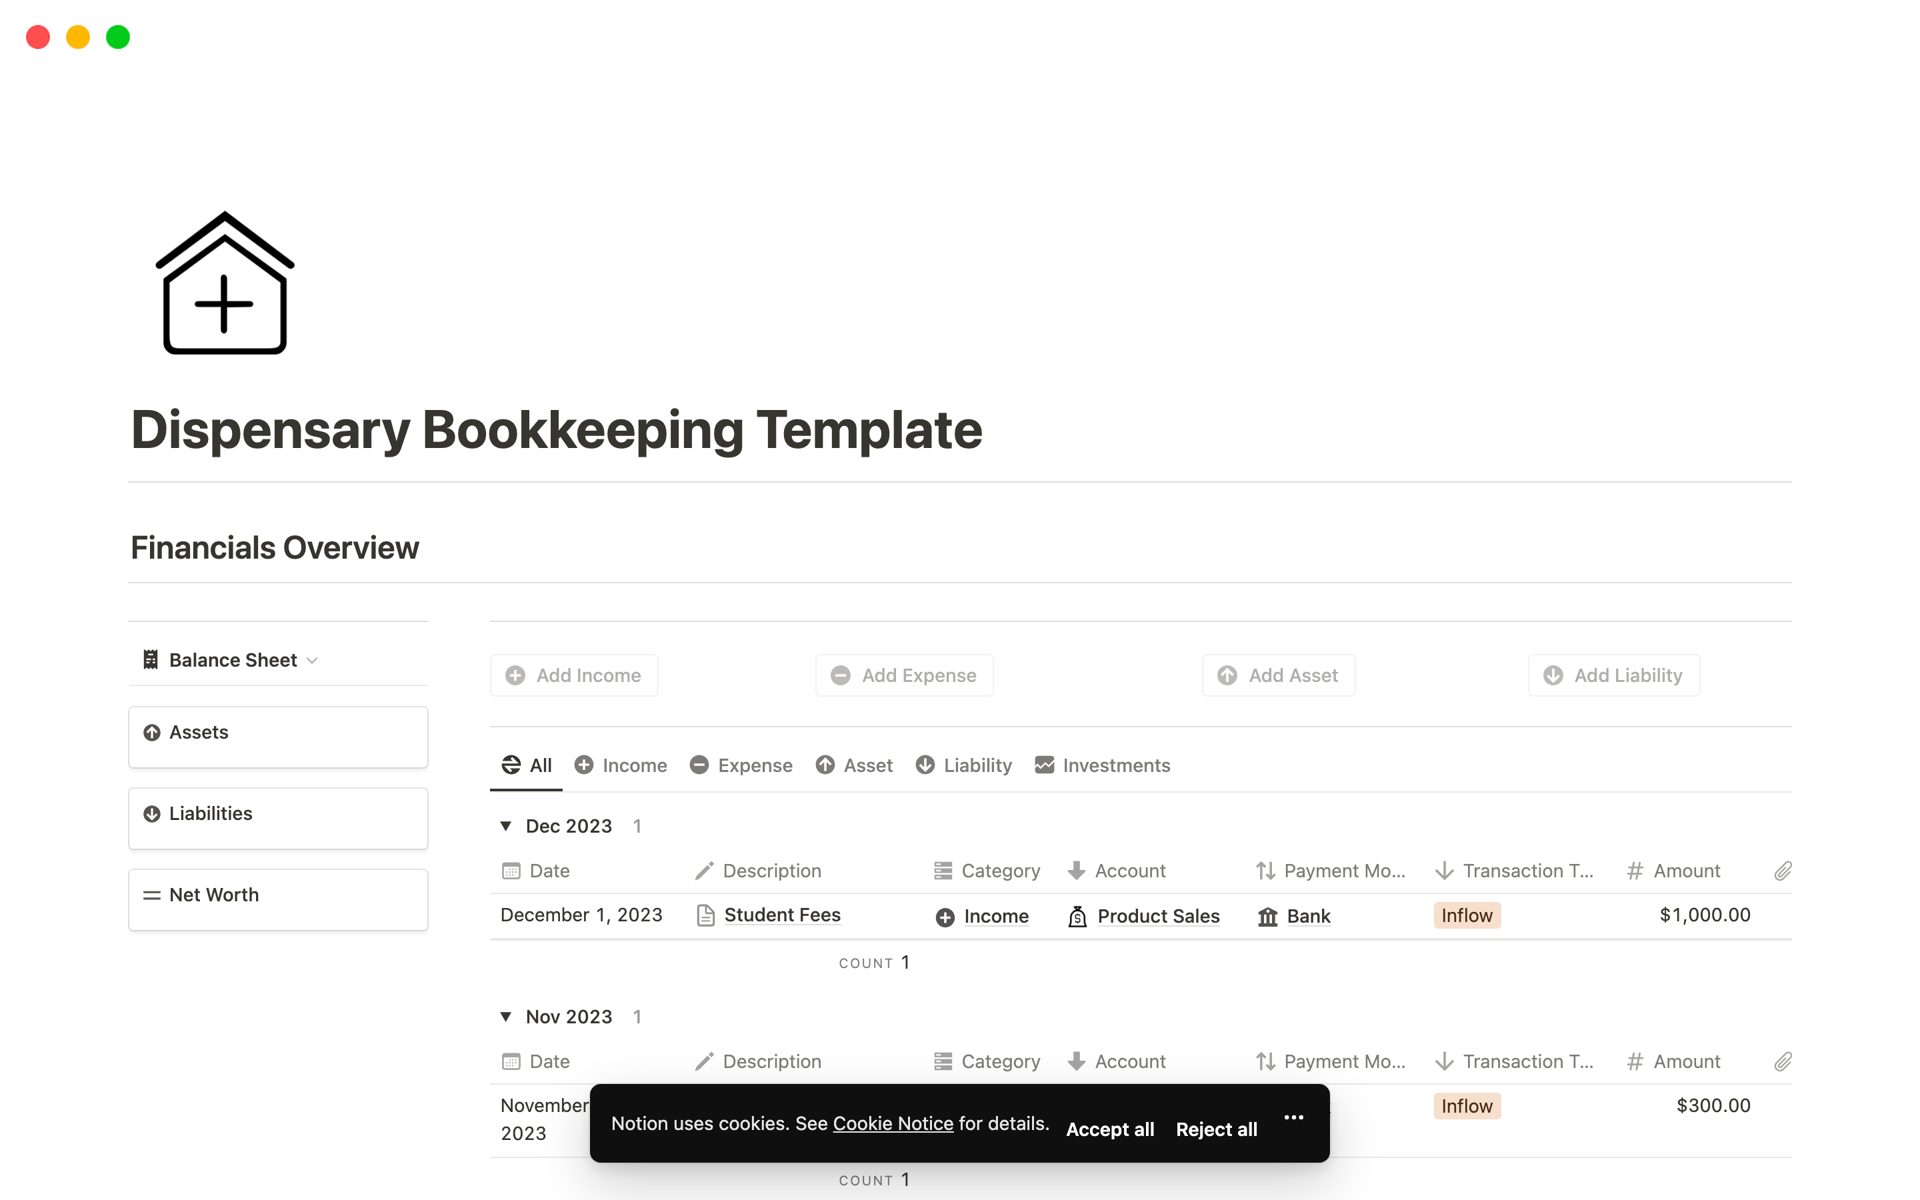 This bookkeeping template provides best solution for dispensaries to manage their business finances, produce income statement, balance sheet, cash flow statement and much more on a periodical basis.     